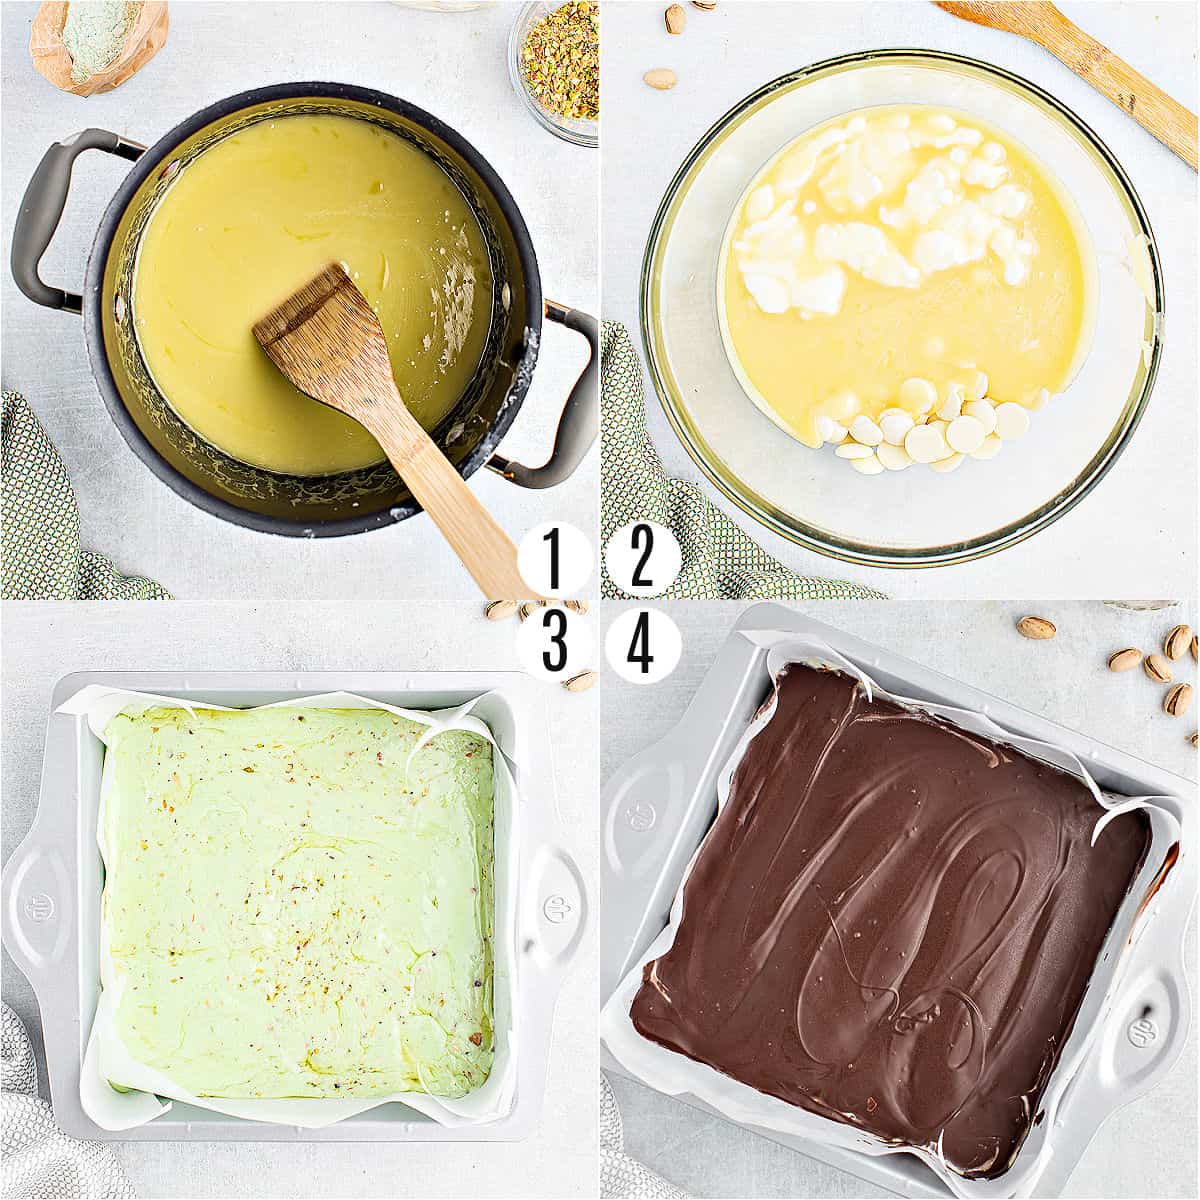 Step by step photos showing how to make pistachio fudge.